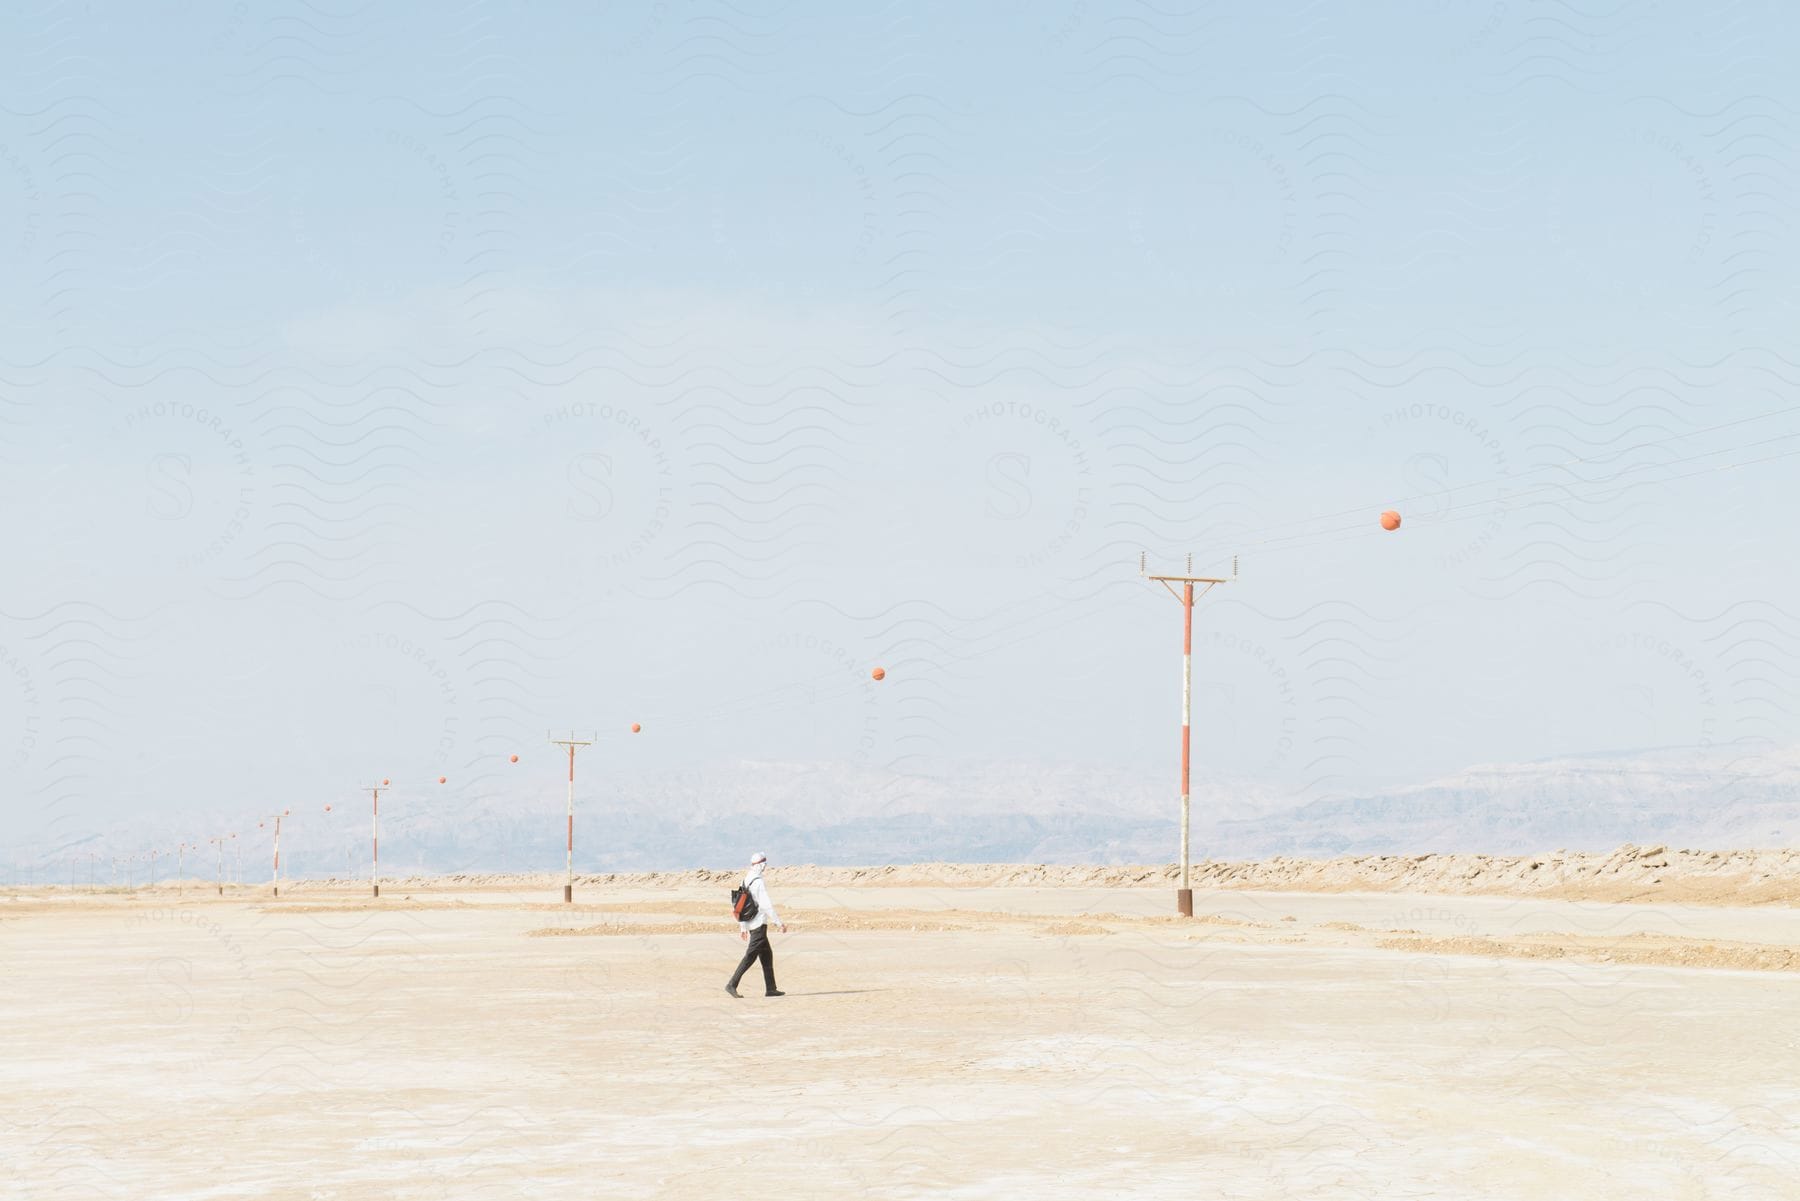 A person walks near power lines in the desert